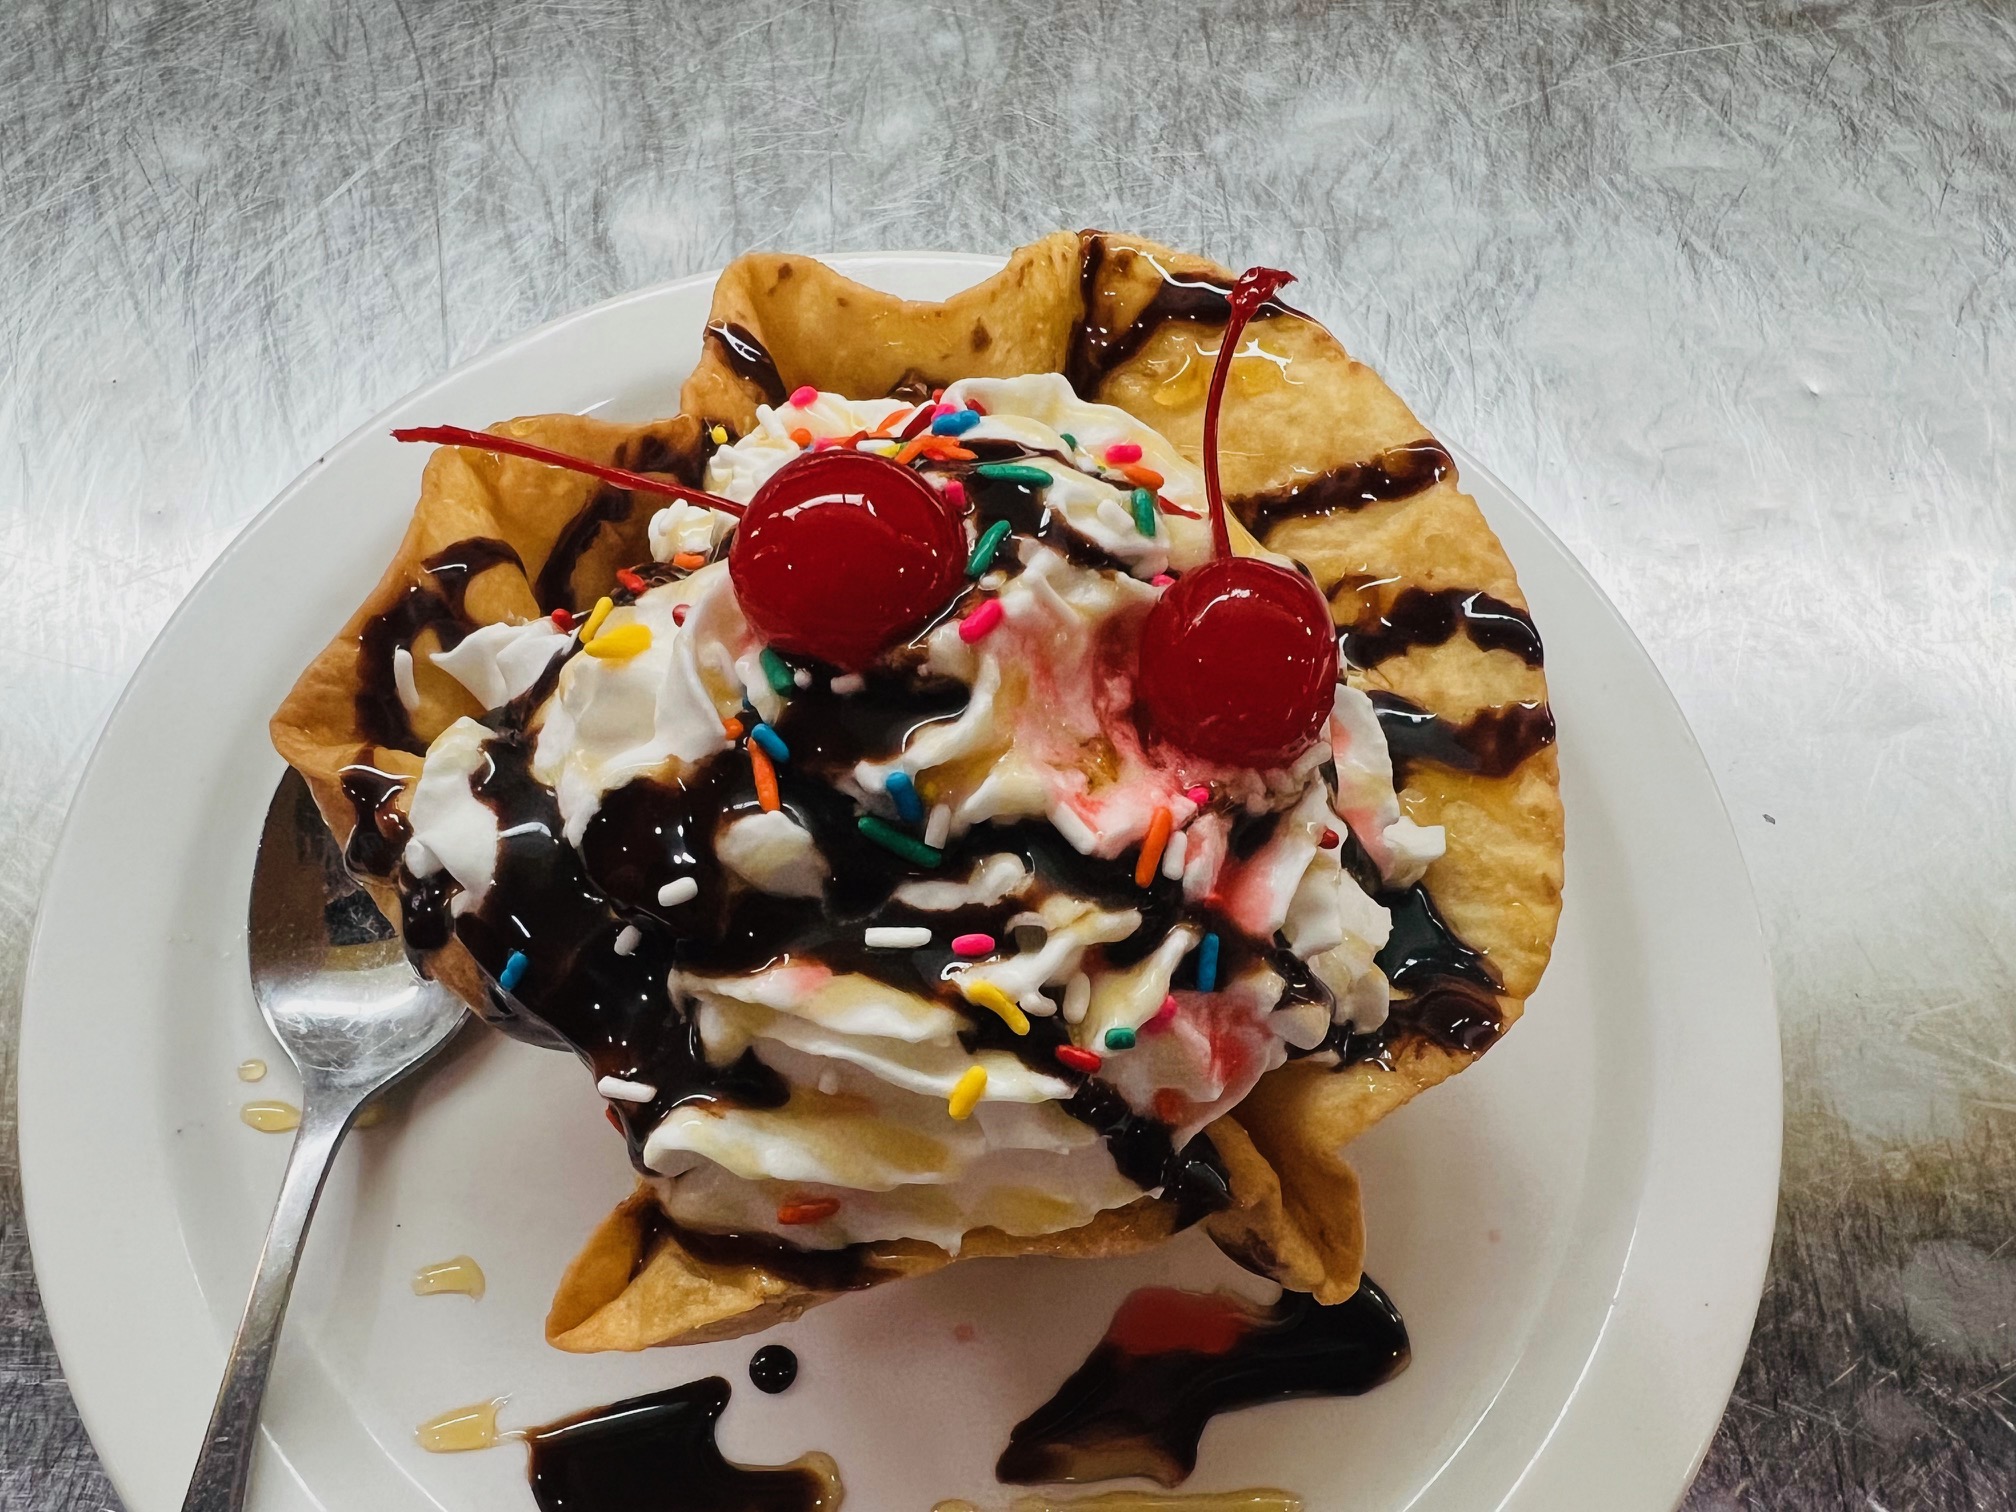 Our dessert specials can't be beat! El Taxco Somerset Mexican Restaurant